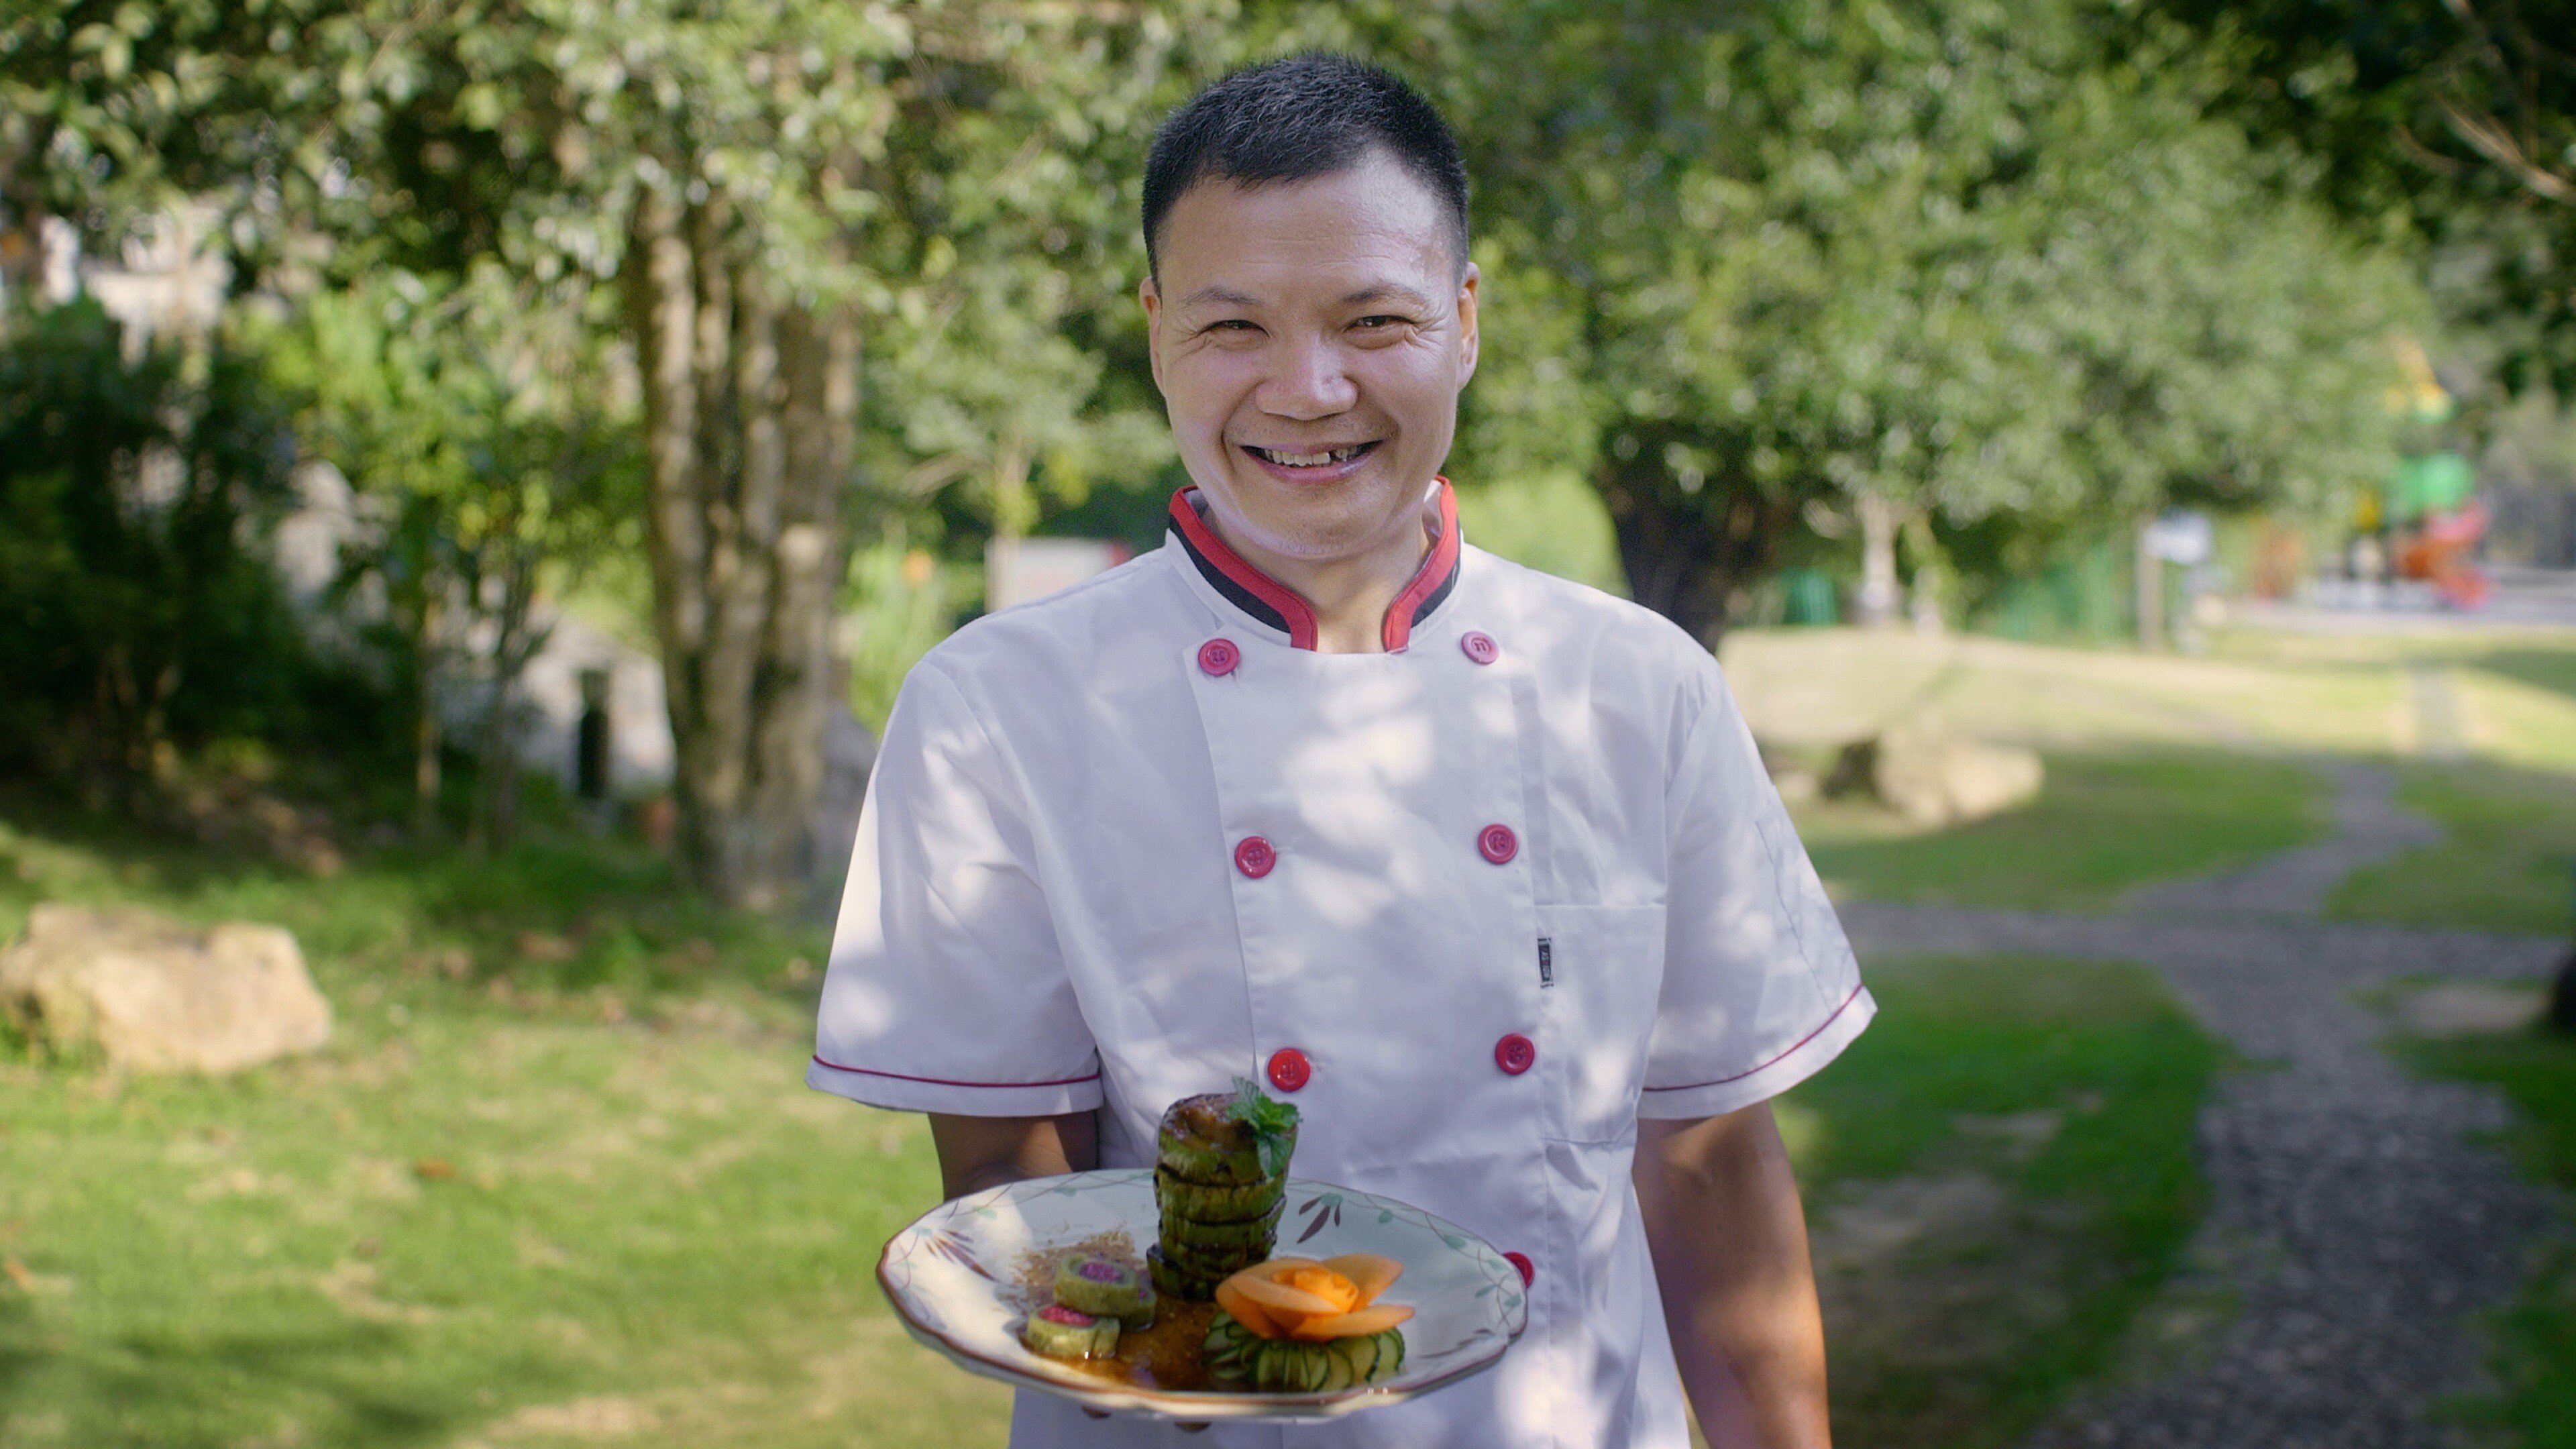 Chef Zhu Nengqing with his signature stuffed chayote dish, which is a popular item on the menu at Xueshan Linyuan Agritainment restaurant.